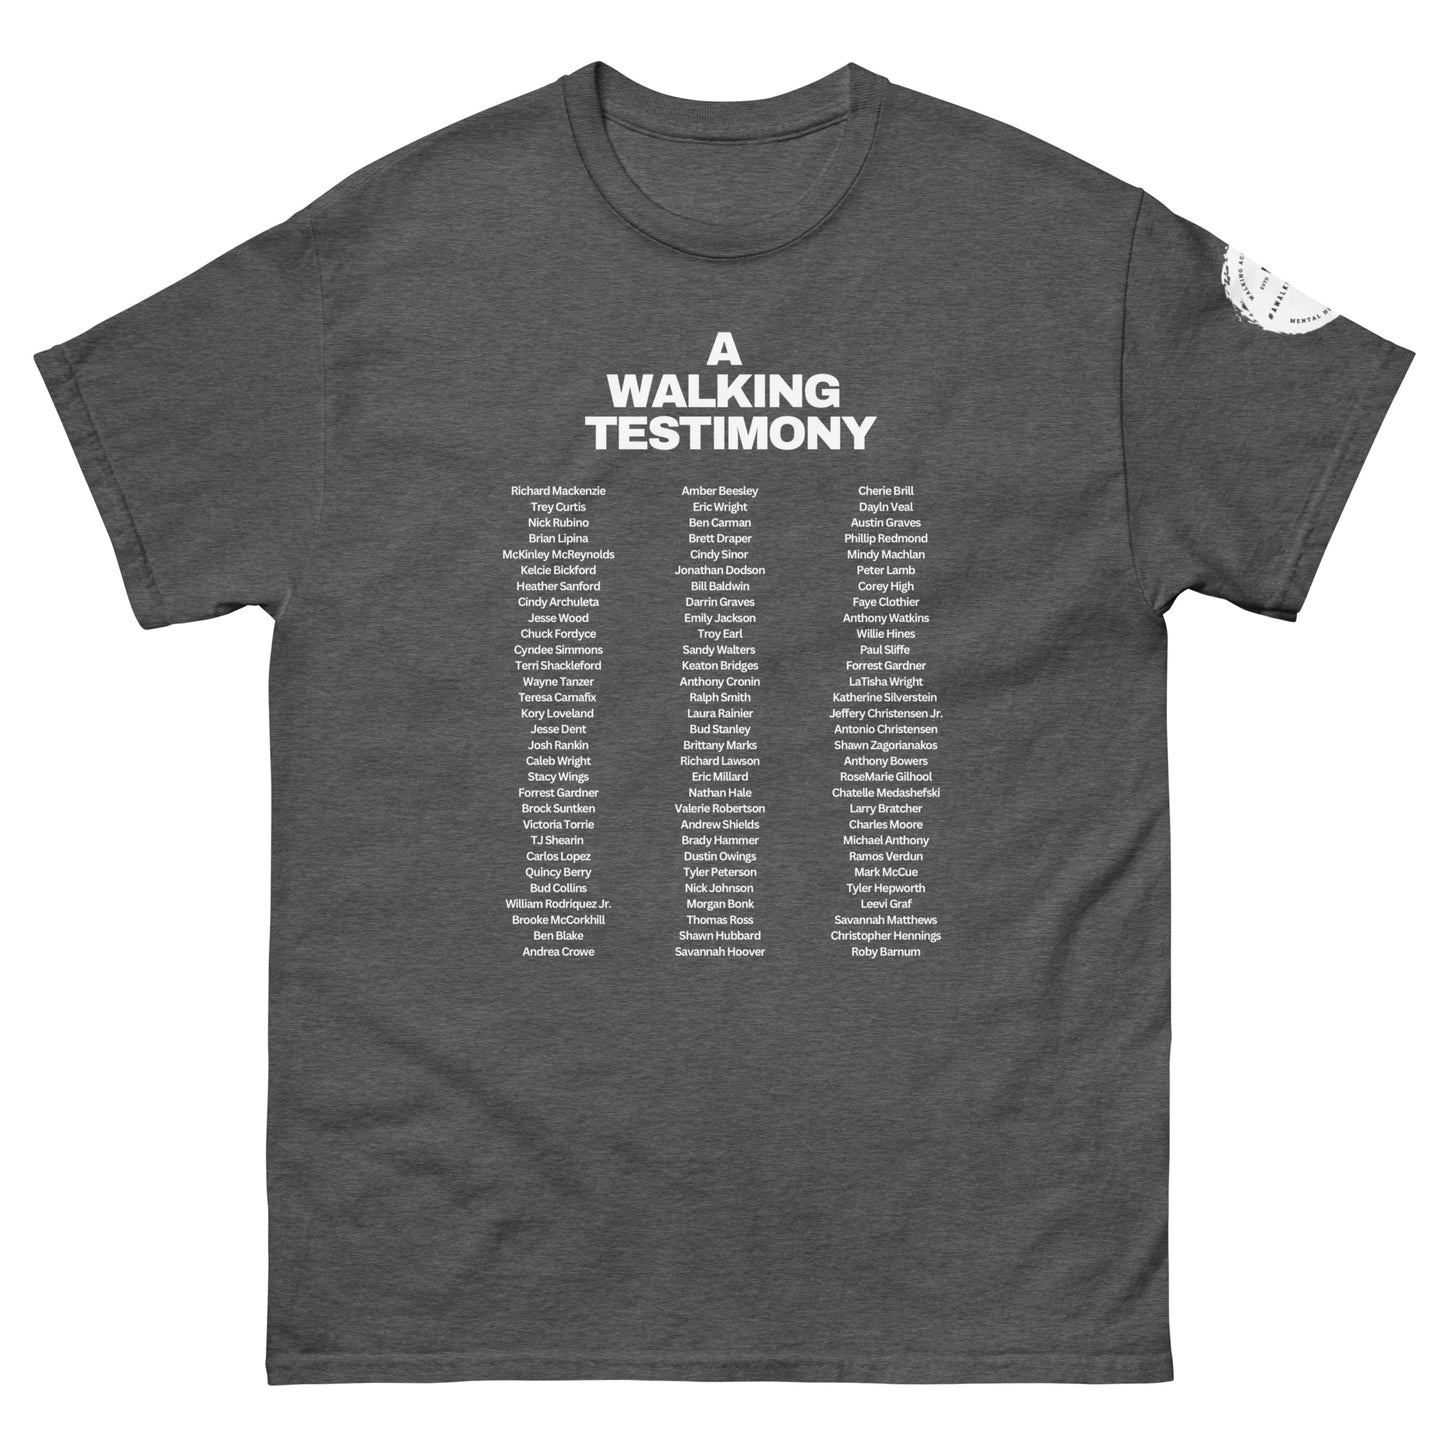 Official A Walking Testimony shirt Edition 4 (dark colors)